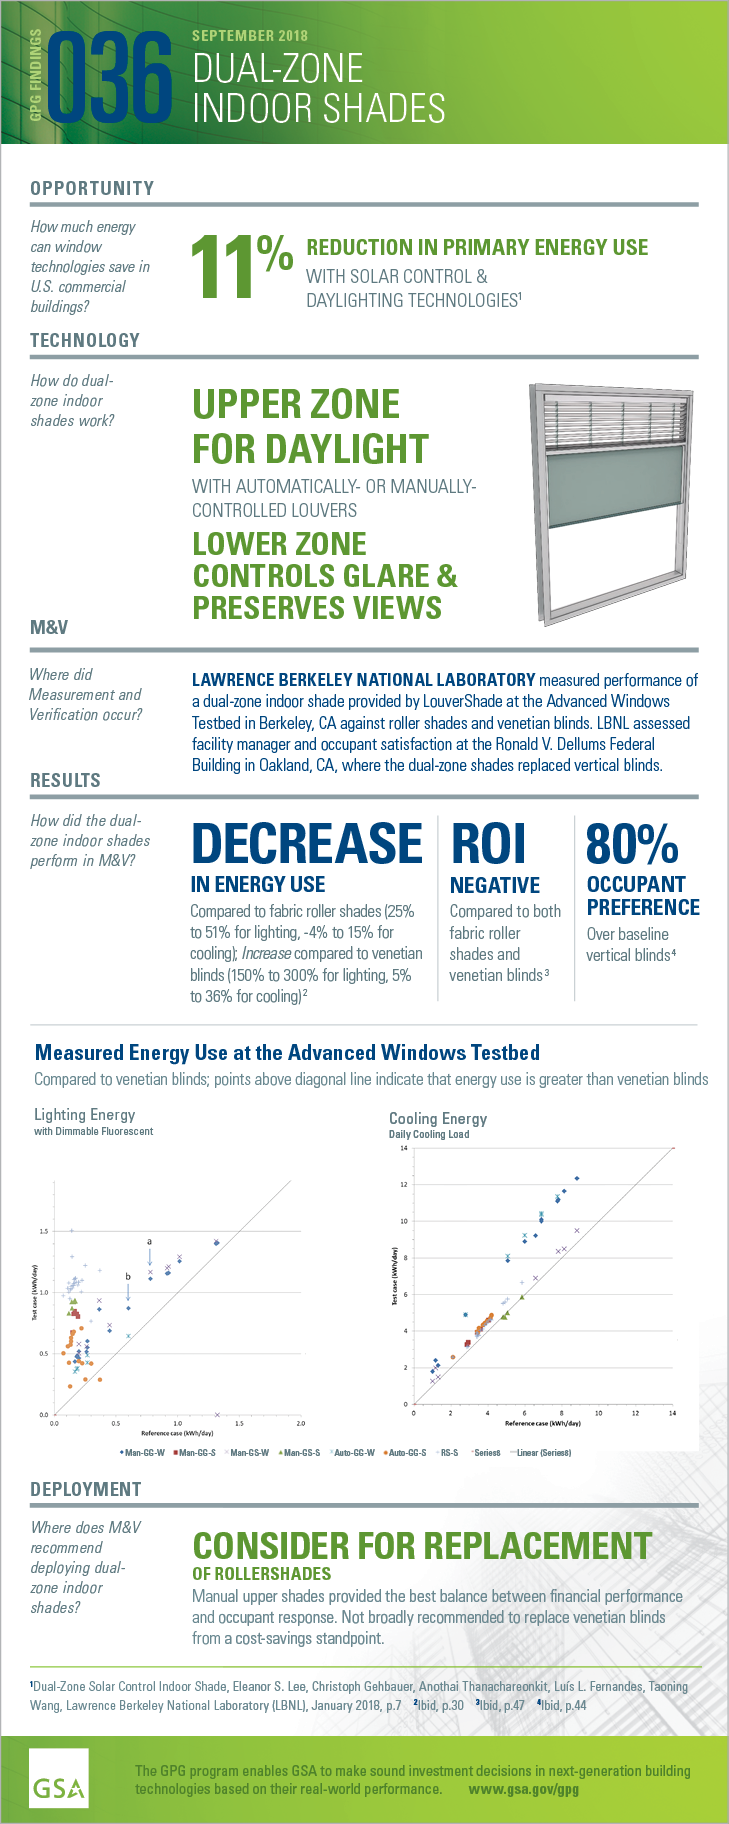 Download the PDF of the full-size infographic for GPG036 Dual-Zone Indoor Shades.